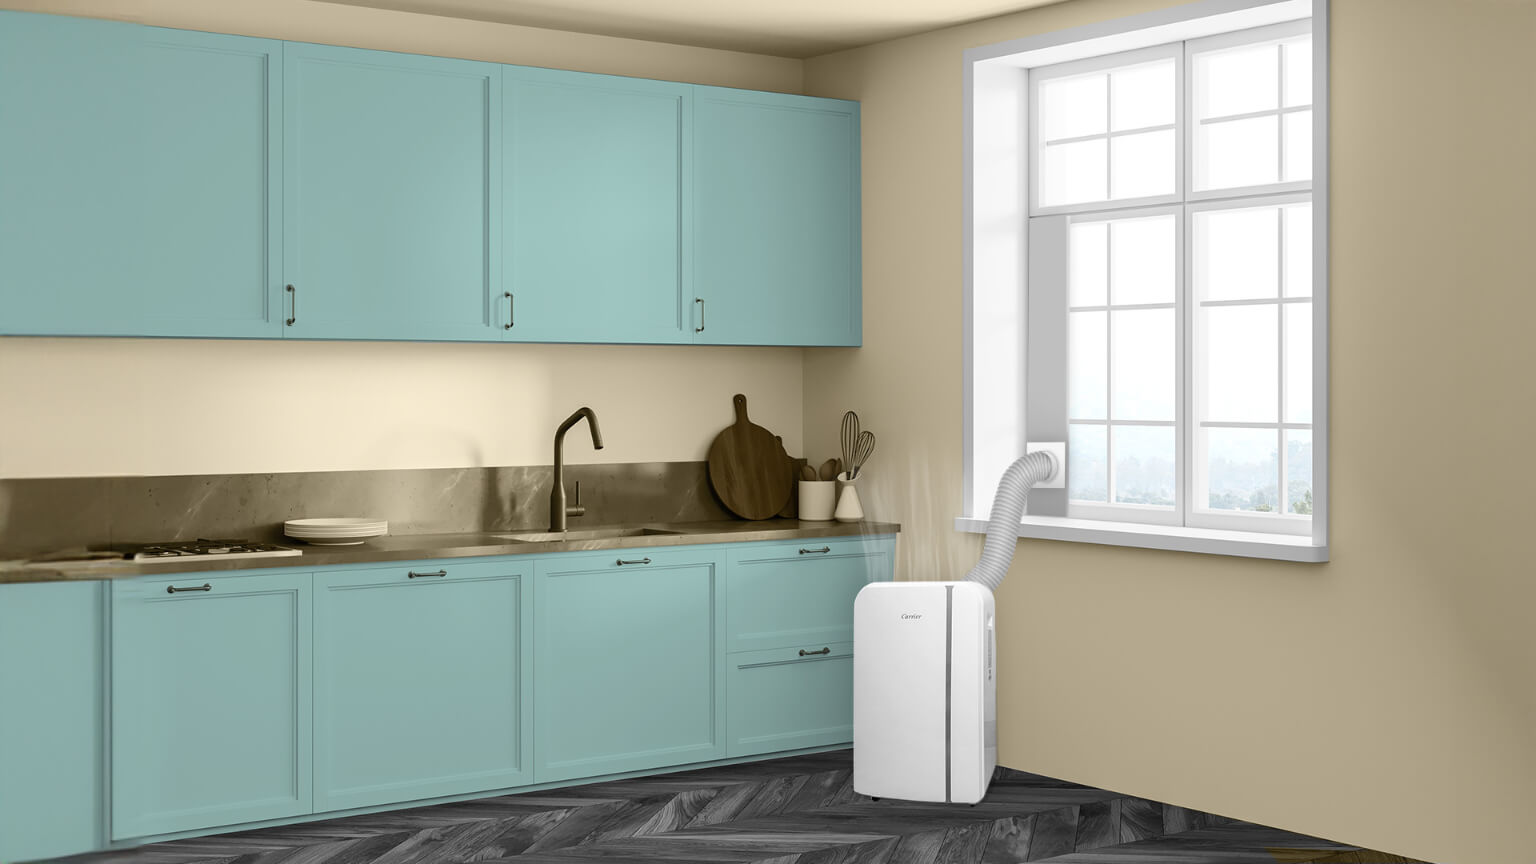 Carrier-portable-airconditioning-unit-inside-a-kitchen